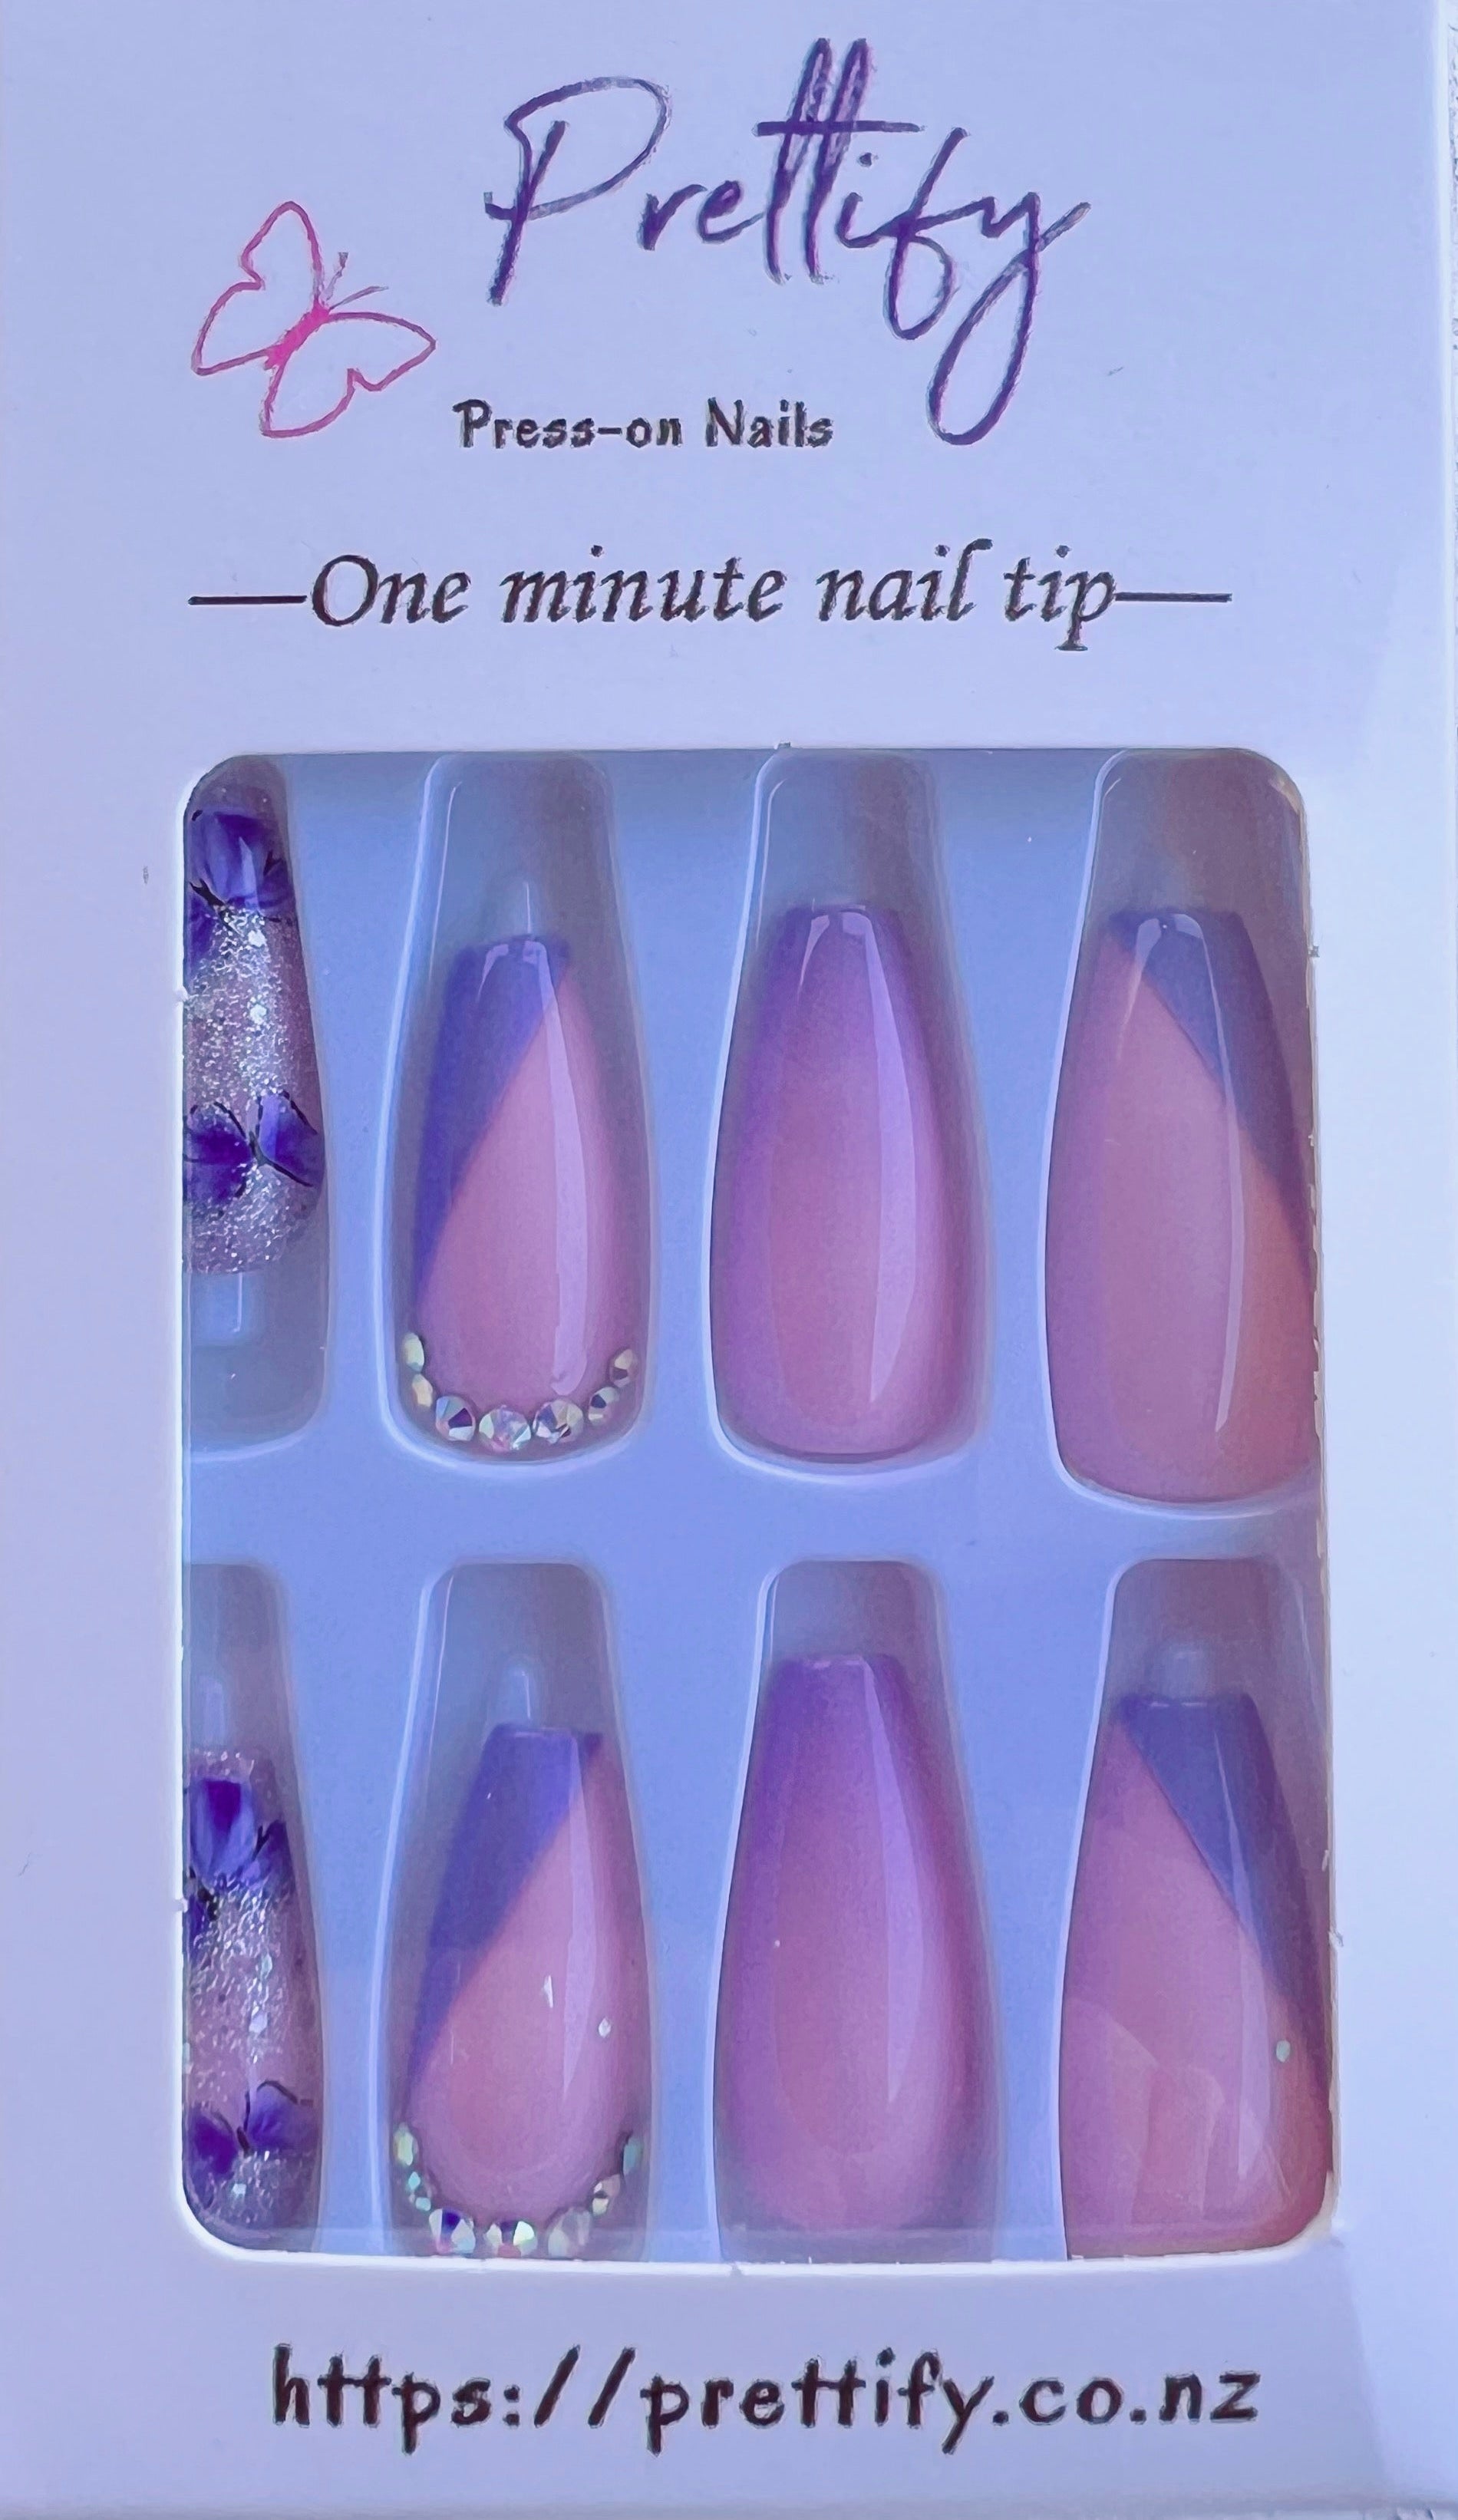 Medium Length Coffin Press on Nails. Lilac & Aqua with Jewels. Easy and quick to apply. Great for those special occasions, parties or add an edge to any outfit. Gorgeous, flattering and you can re-use them again and again.